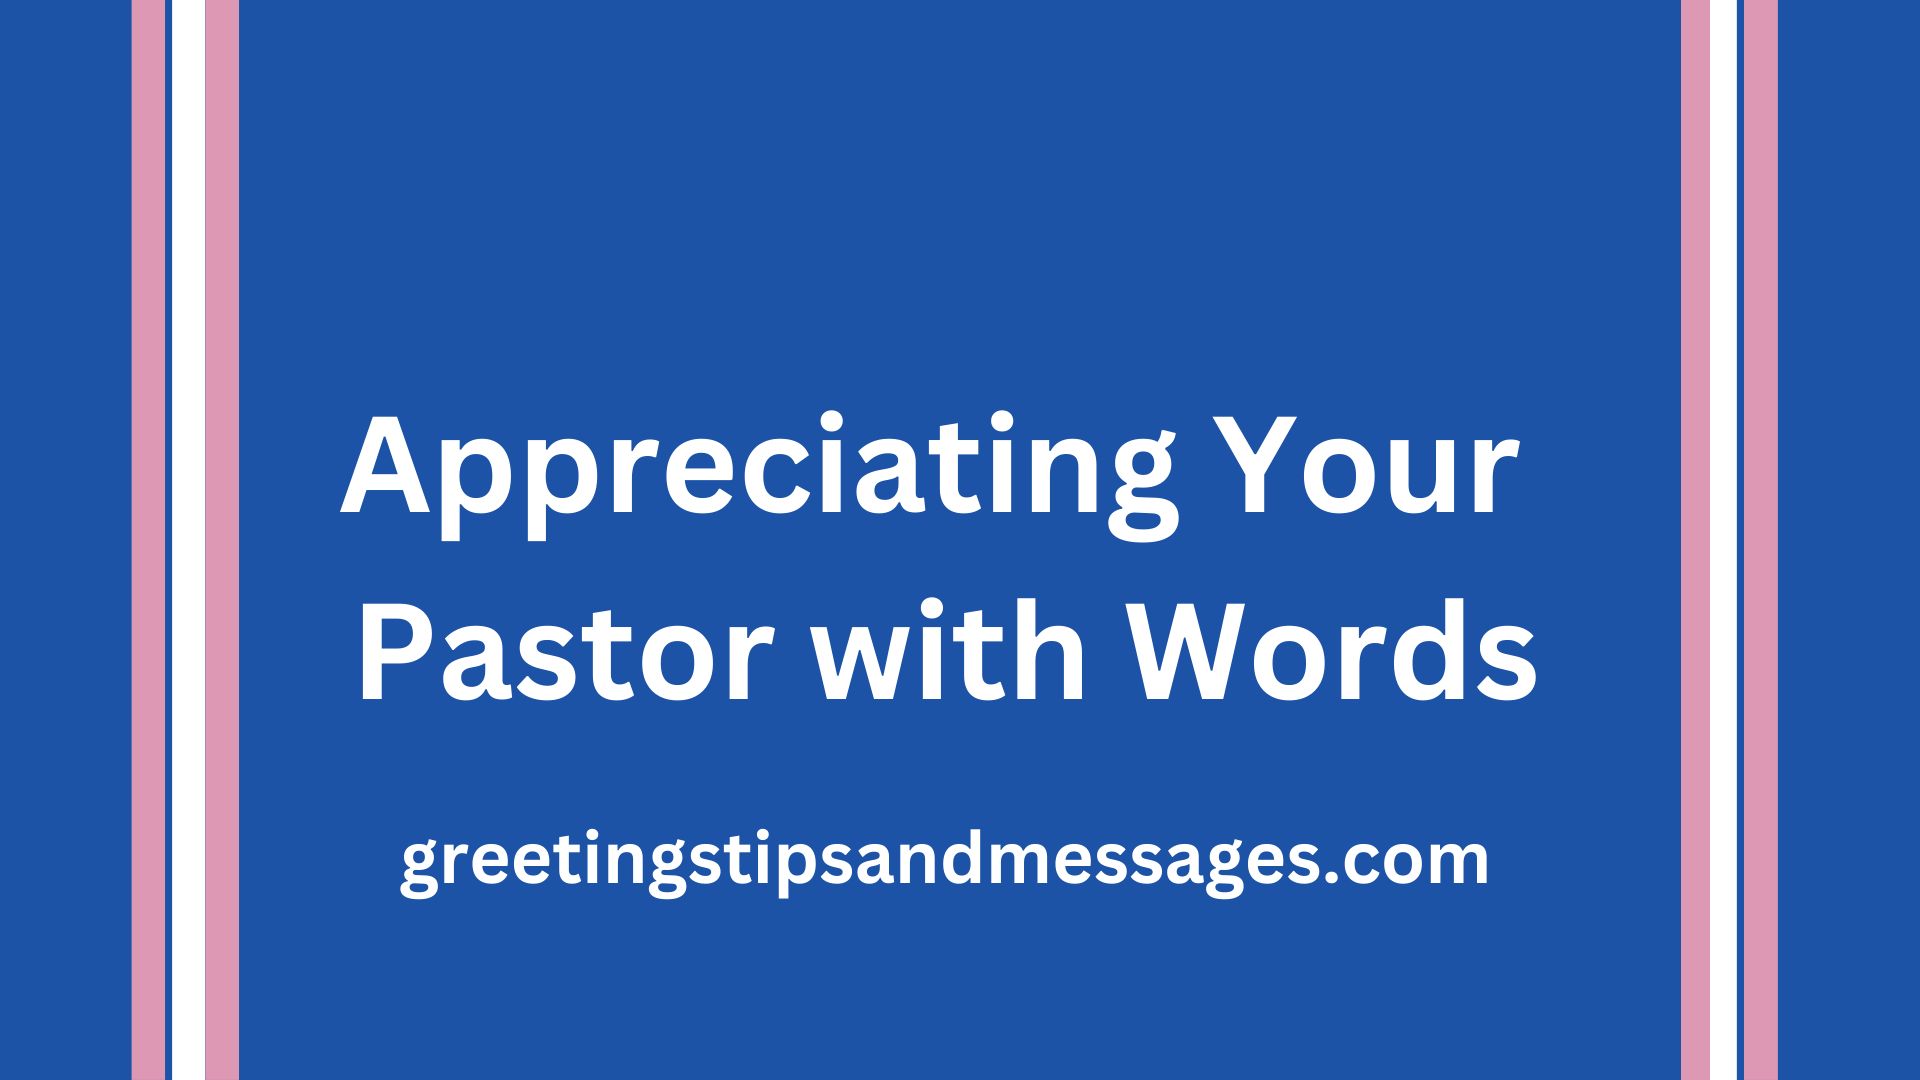 Appreciating Your Pastor with Words